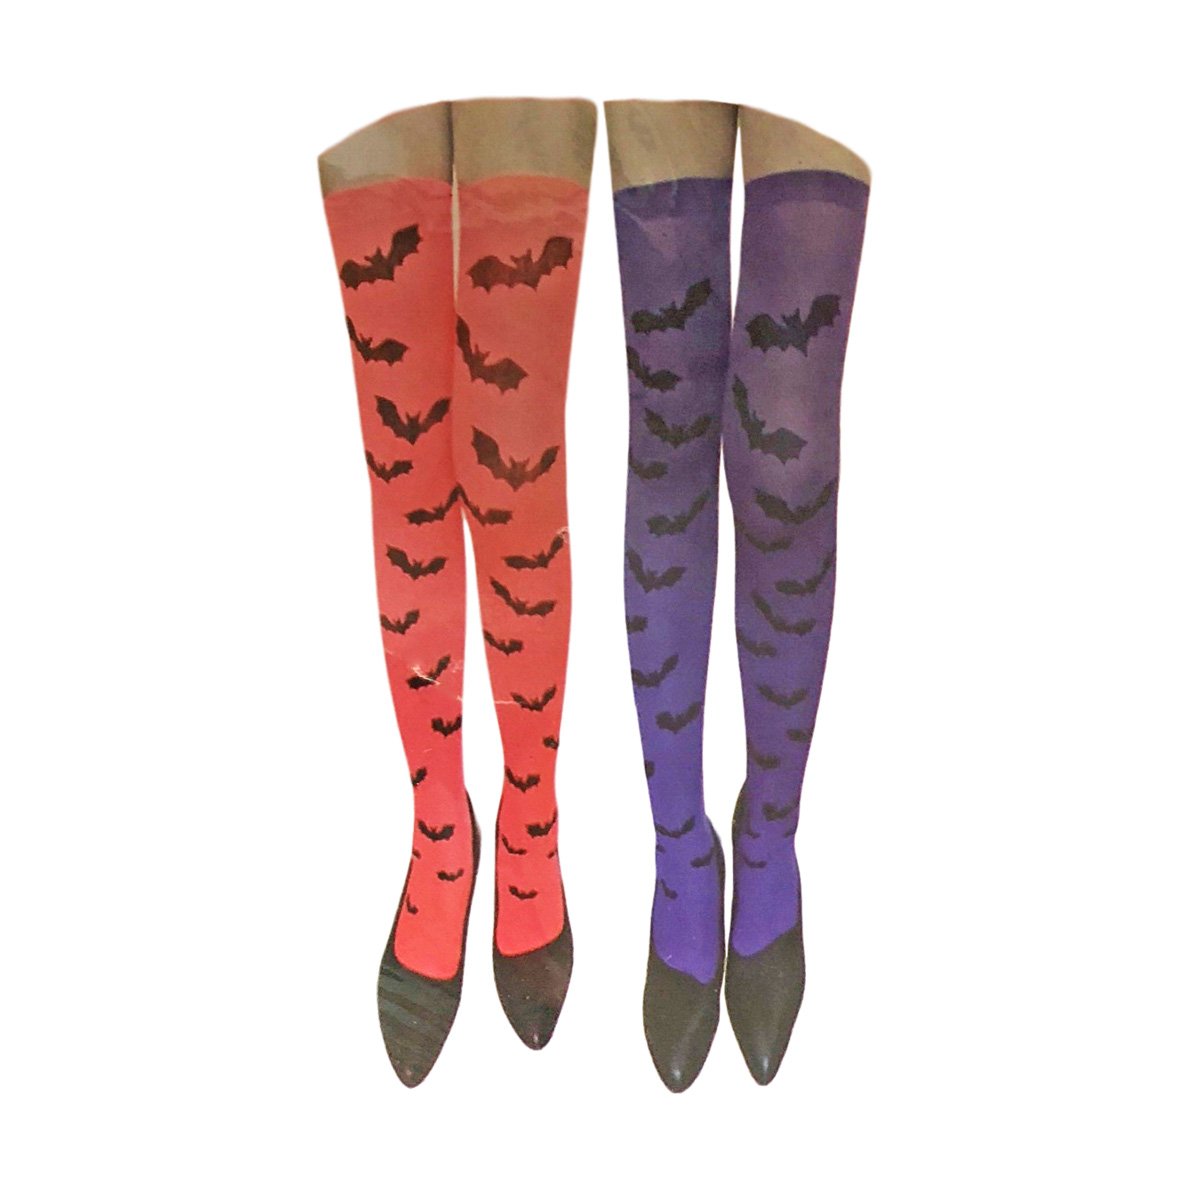 Halloween Stockings - Neon Orange With Black Bats – Simply Party Supplies